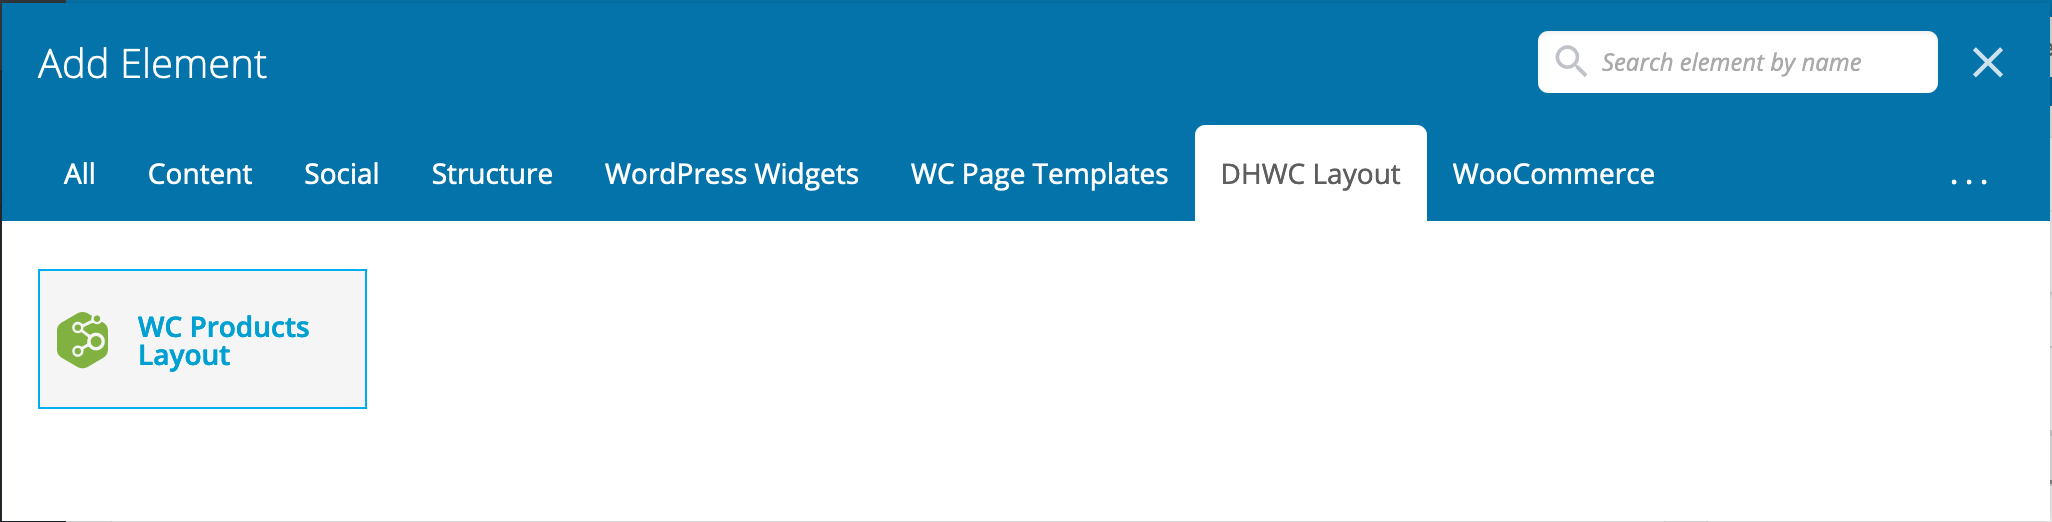 DHWCLayout - Woocommerce Products Layouts WPbakery